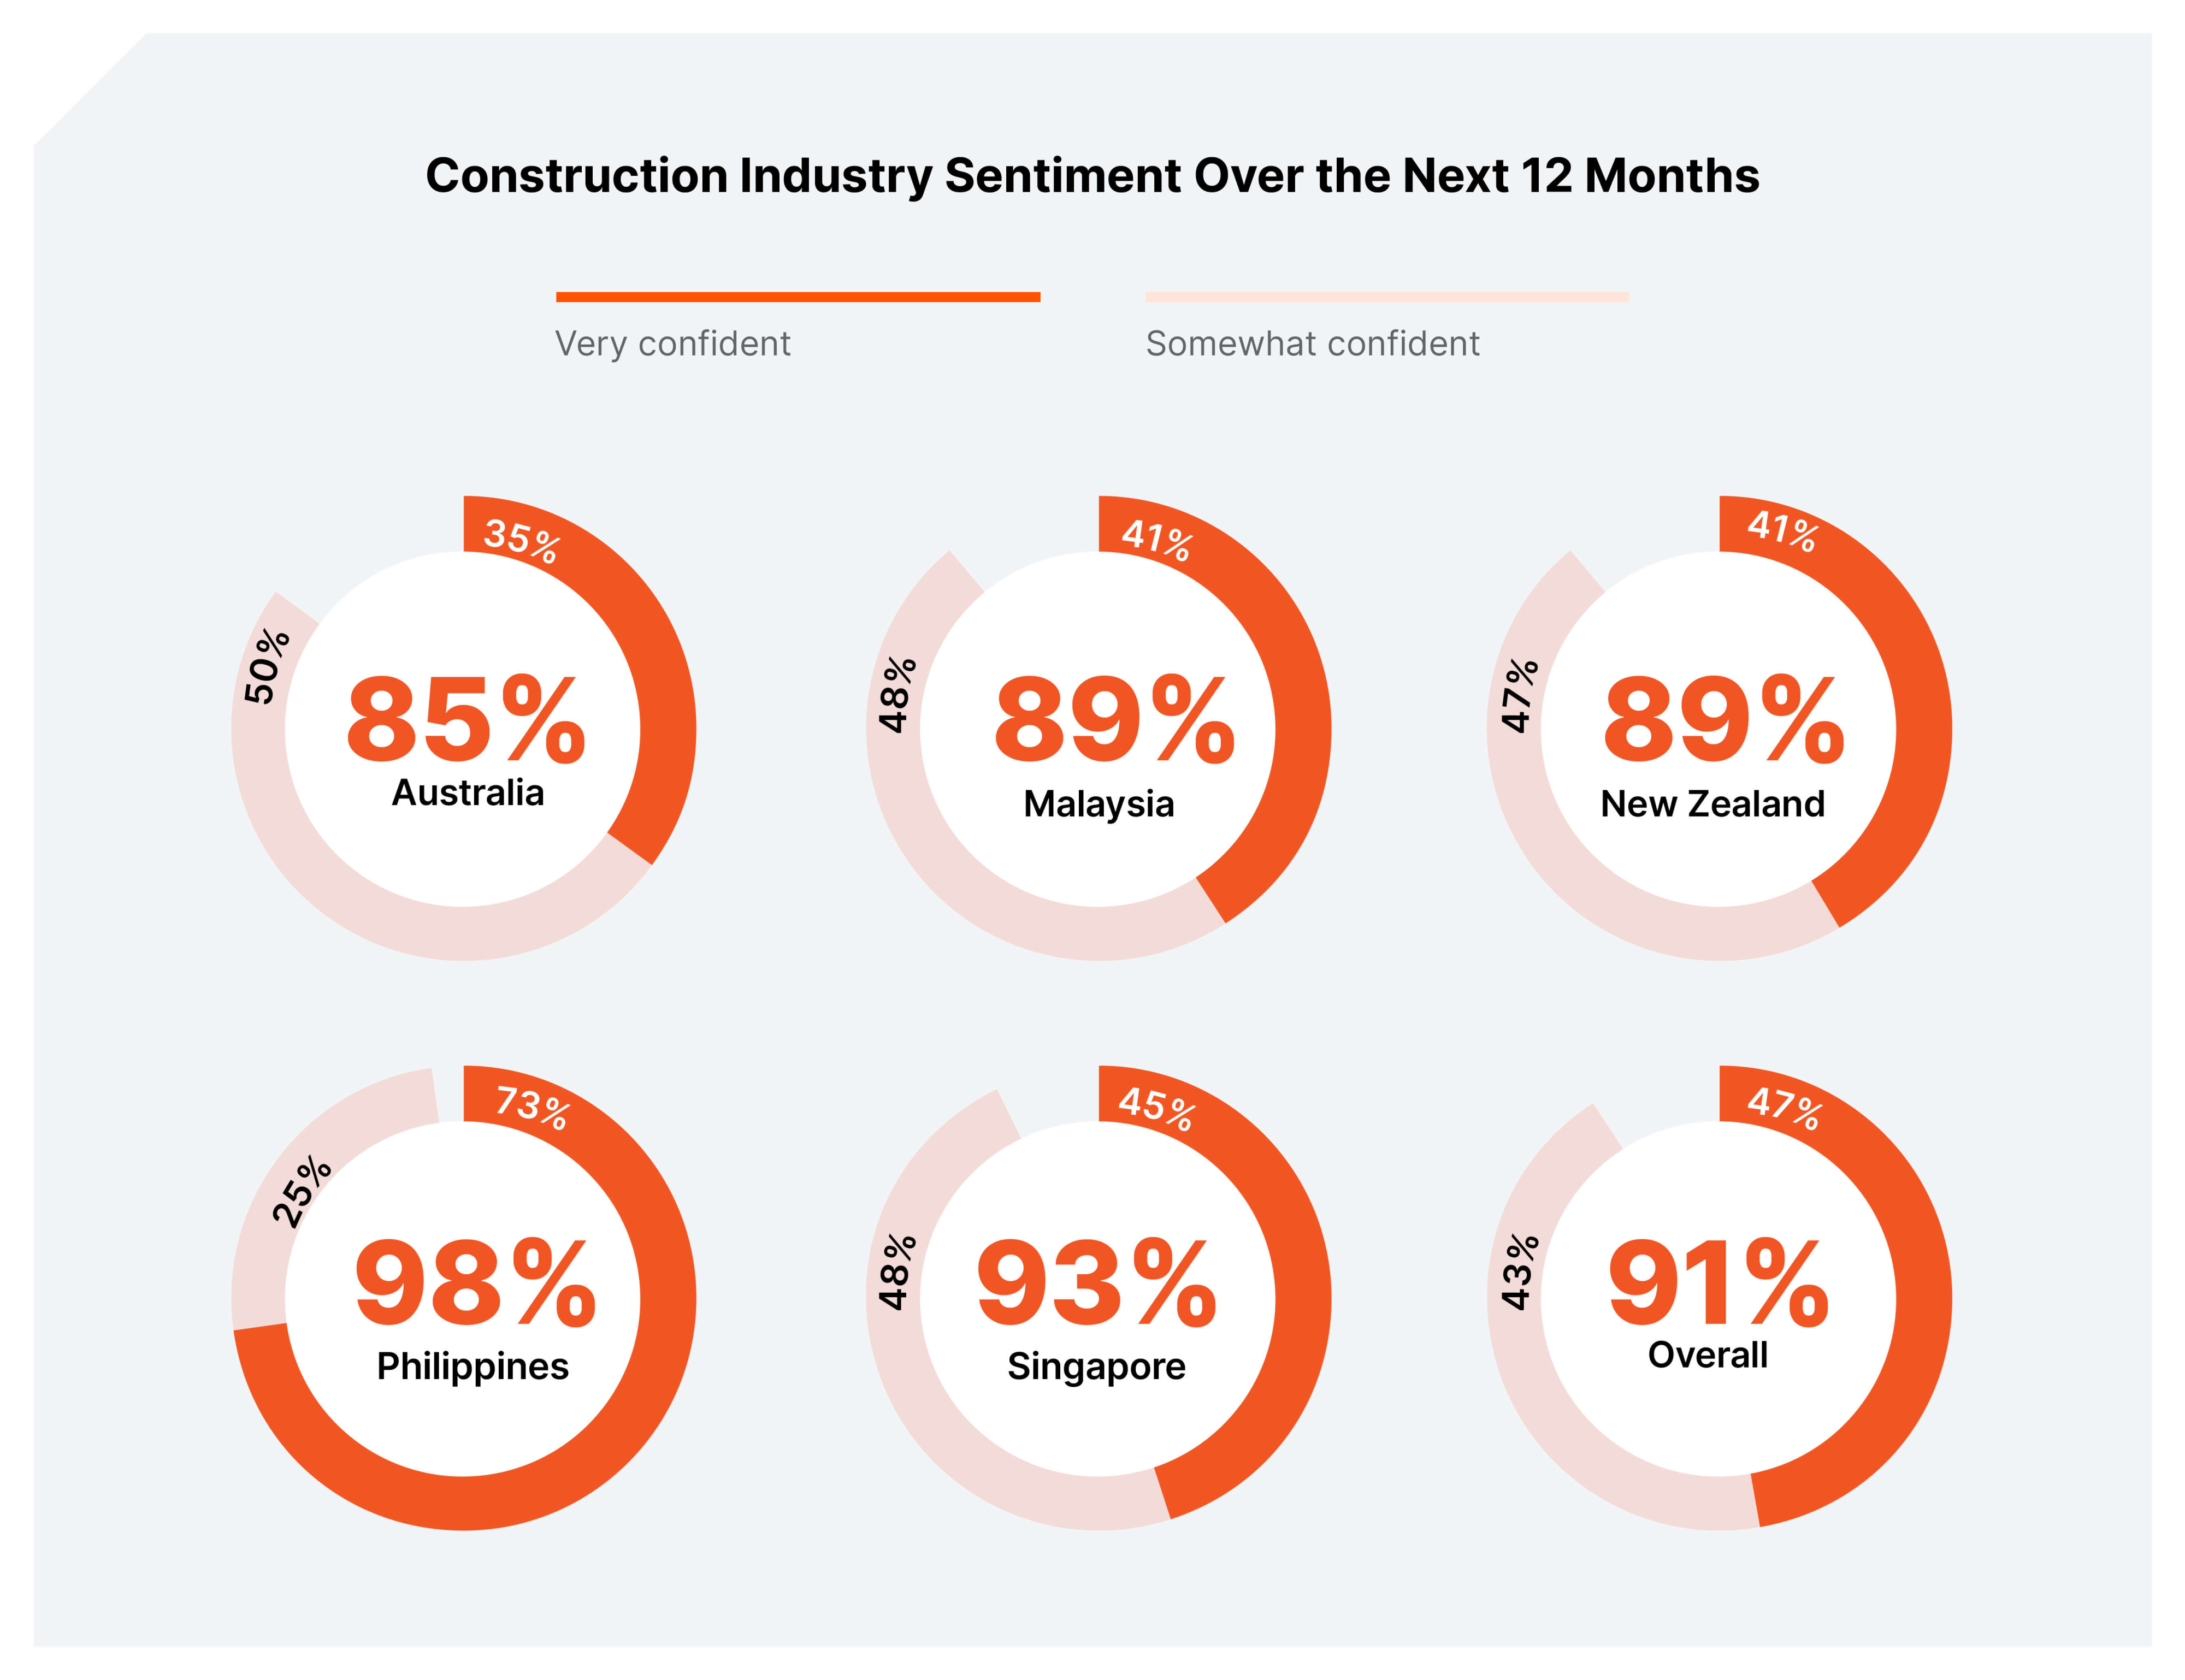 stats of the construction industry sentiment over the next 12 months in APAC region